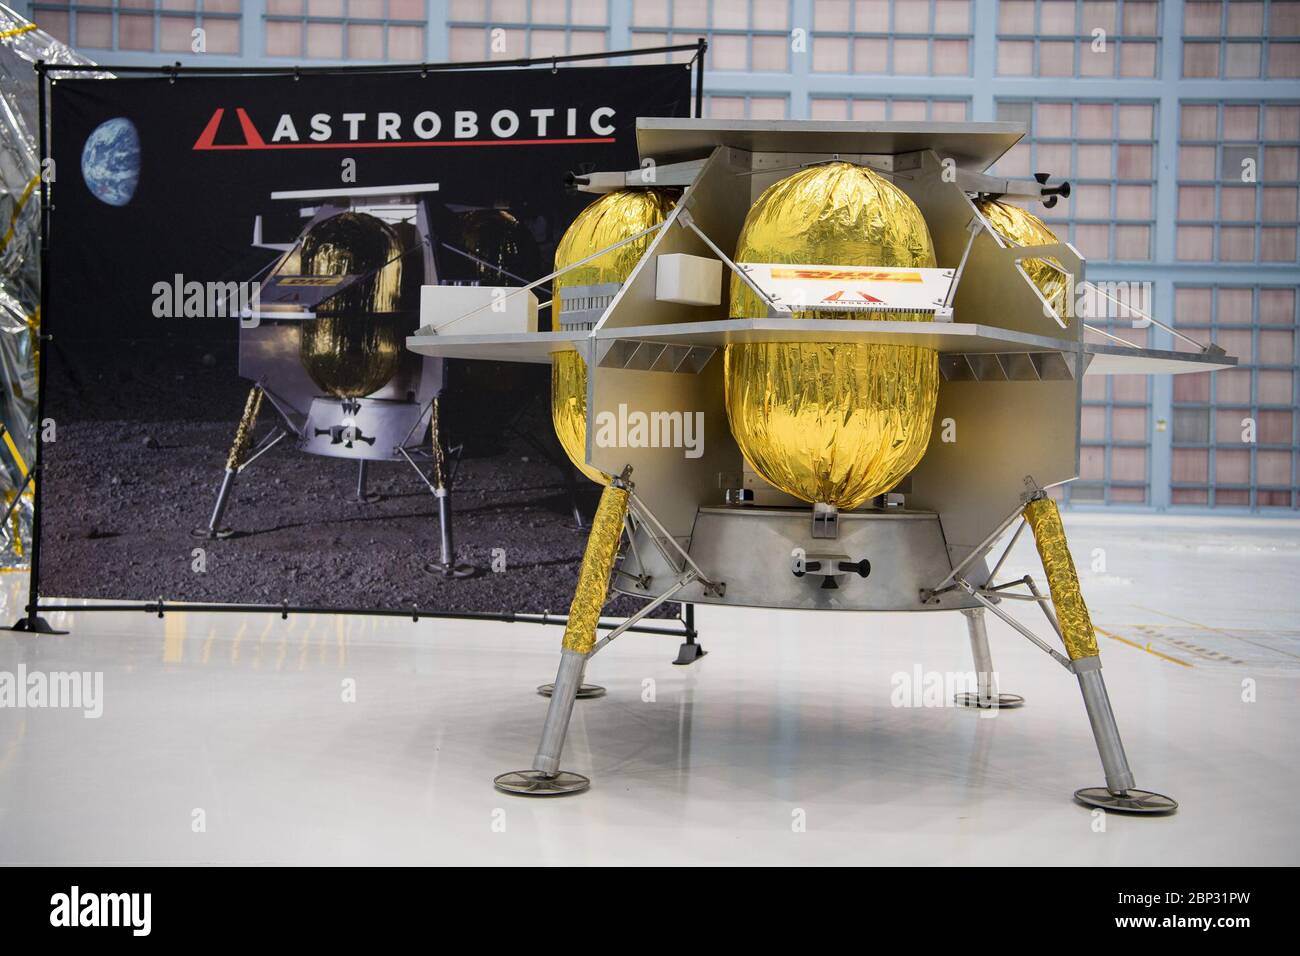 Commercial Lunar Payload Services Announcement  The Astrobotic lunar lander is seen, Friday, May 31, 2019, at Goddard Space Flight Center in Md. Astrobotic, Intuitive Machines, and OrbitBeyond have been selected to provide the first lunar landers for the Artemis program's lunar surface exploration. Stock Photo